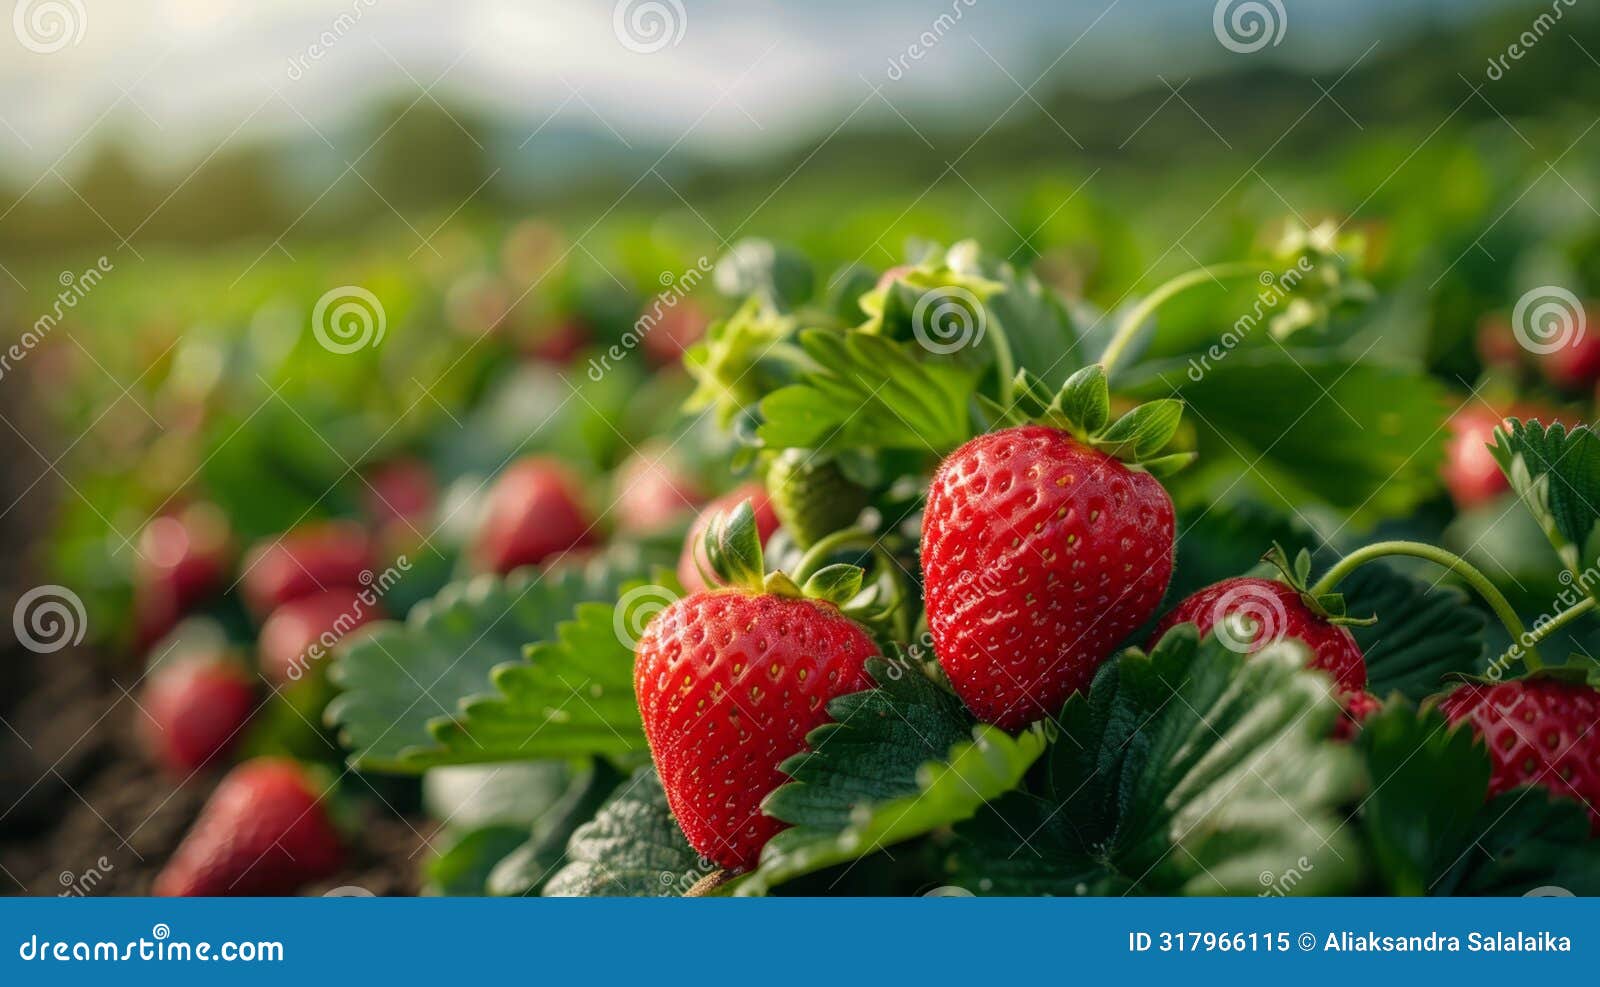 agricultural farming, a farmer diligently looking after rows of strawberry plants in a scenic strawberry field, ensuring